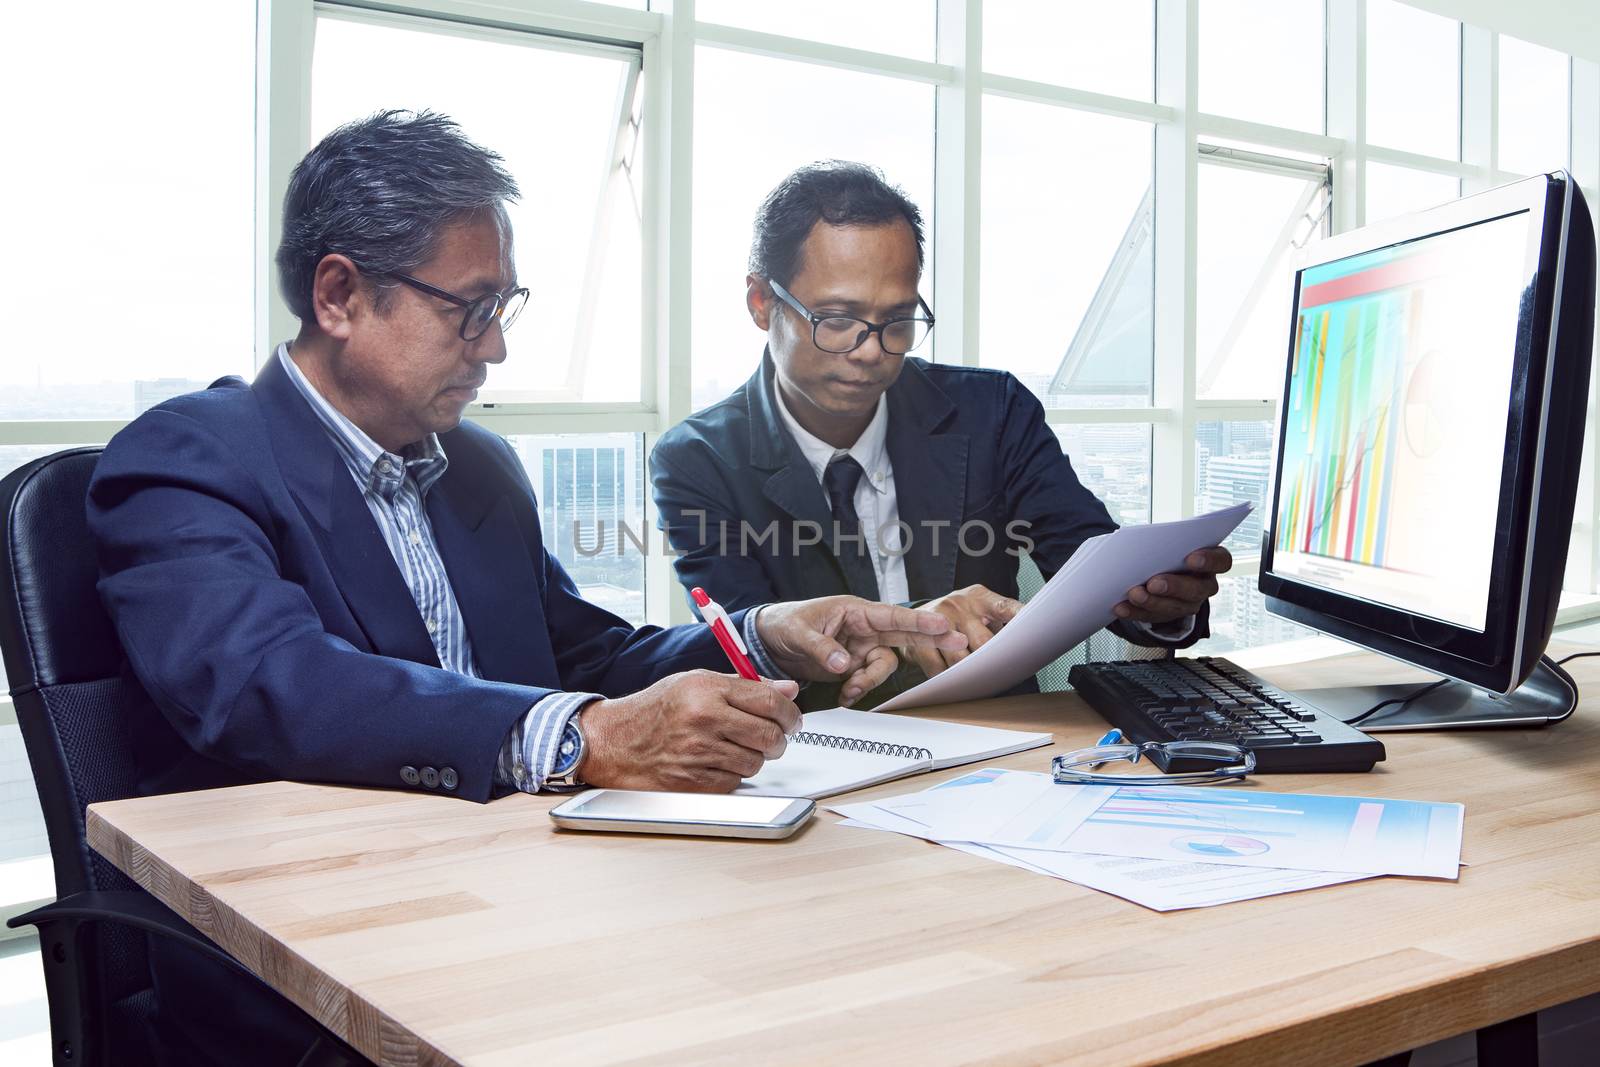 partner of senior engineering working man serious meeting about project discussing solution shot on table in office meeting room 